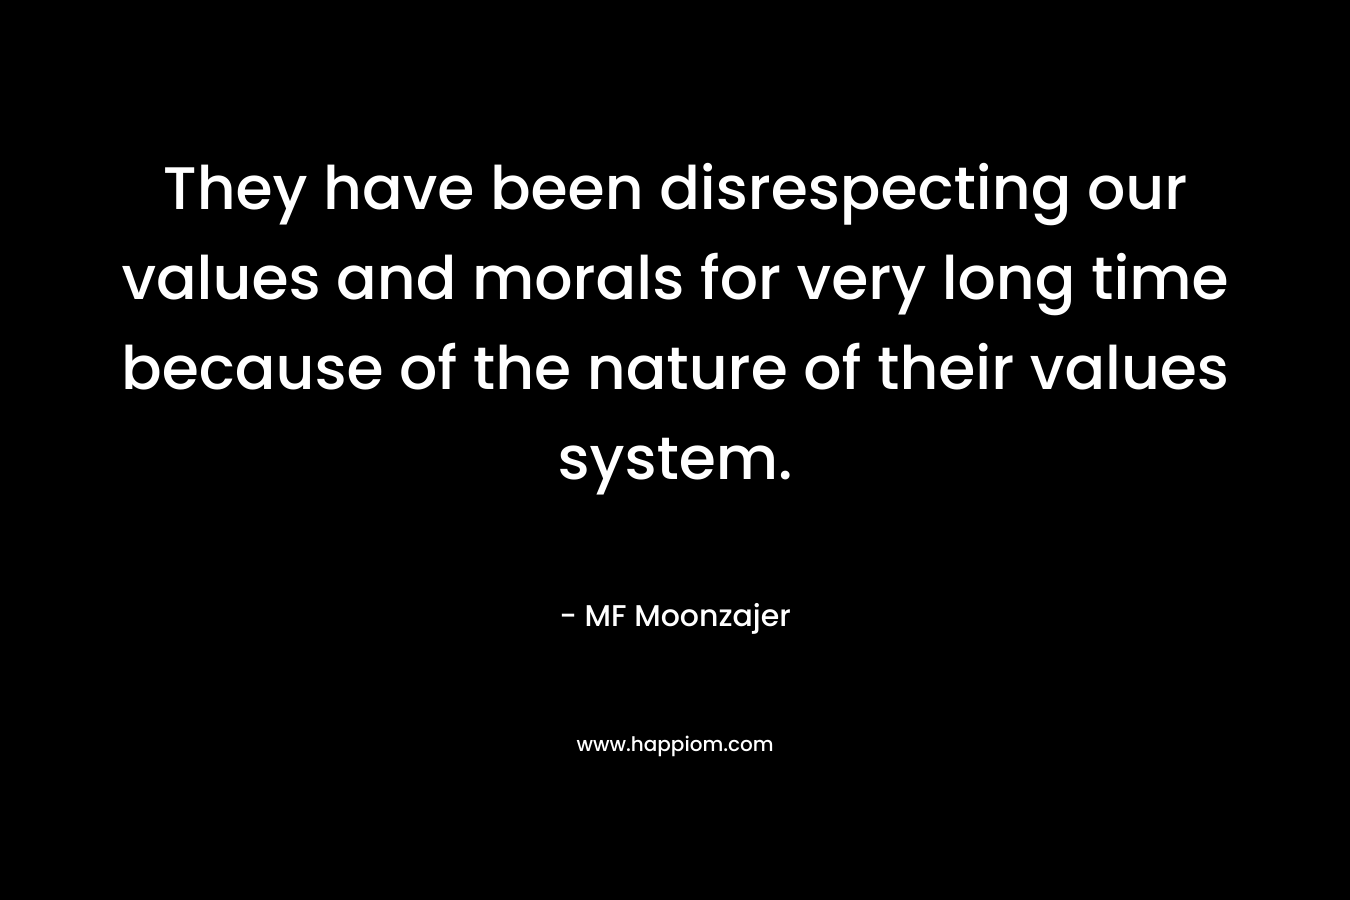 They have been disrespecting our values and morals for very long time because of the nature of their values system. – MF Moonzajer